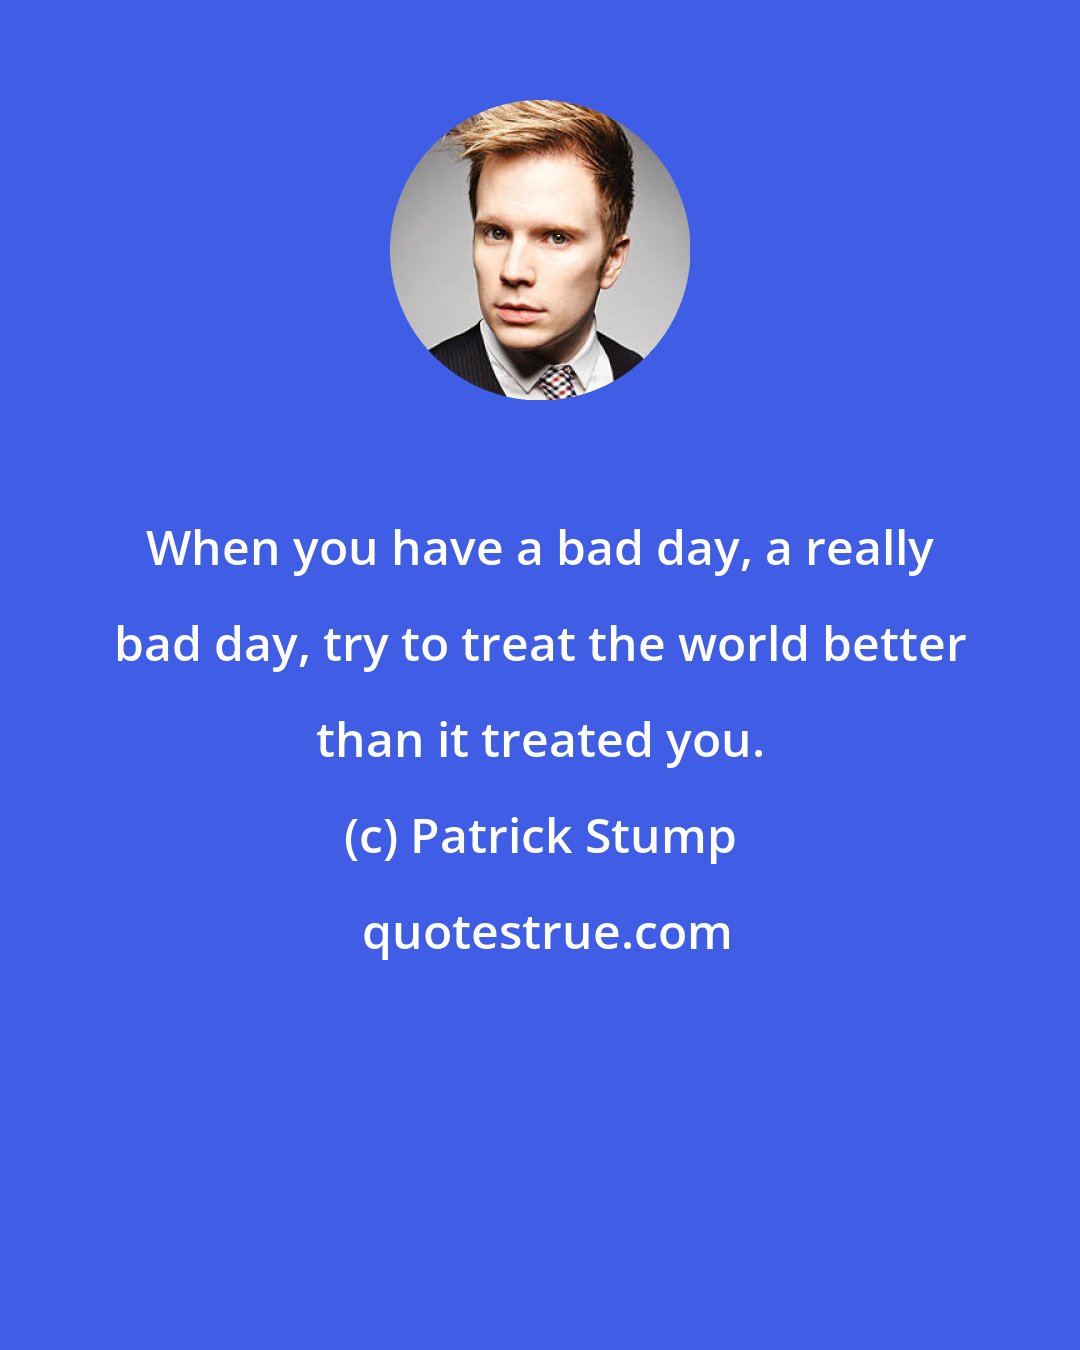 Patrick Stump: When you have a bad day, a really bad day, try to treat the world better than it treated you.